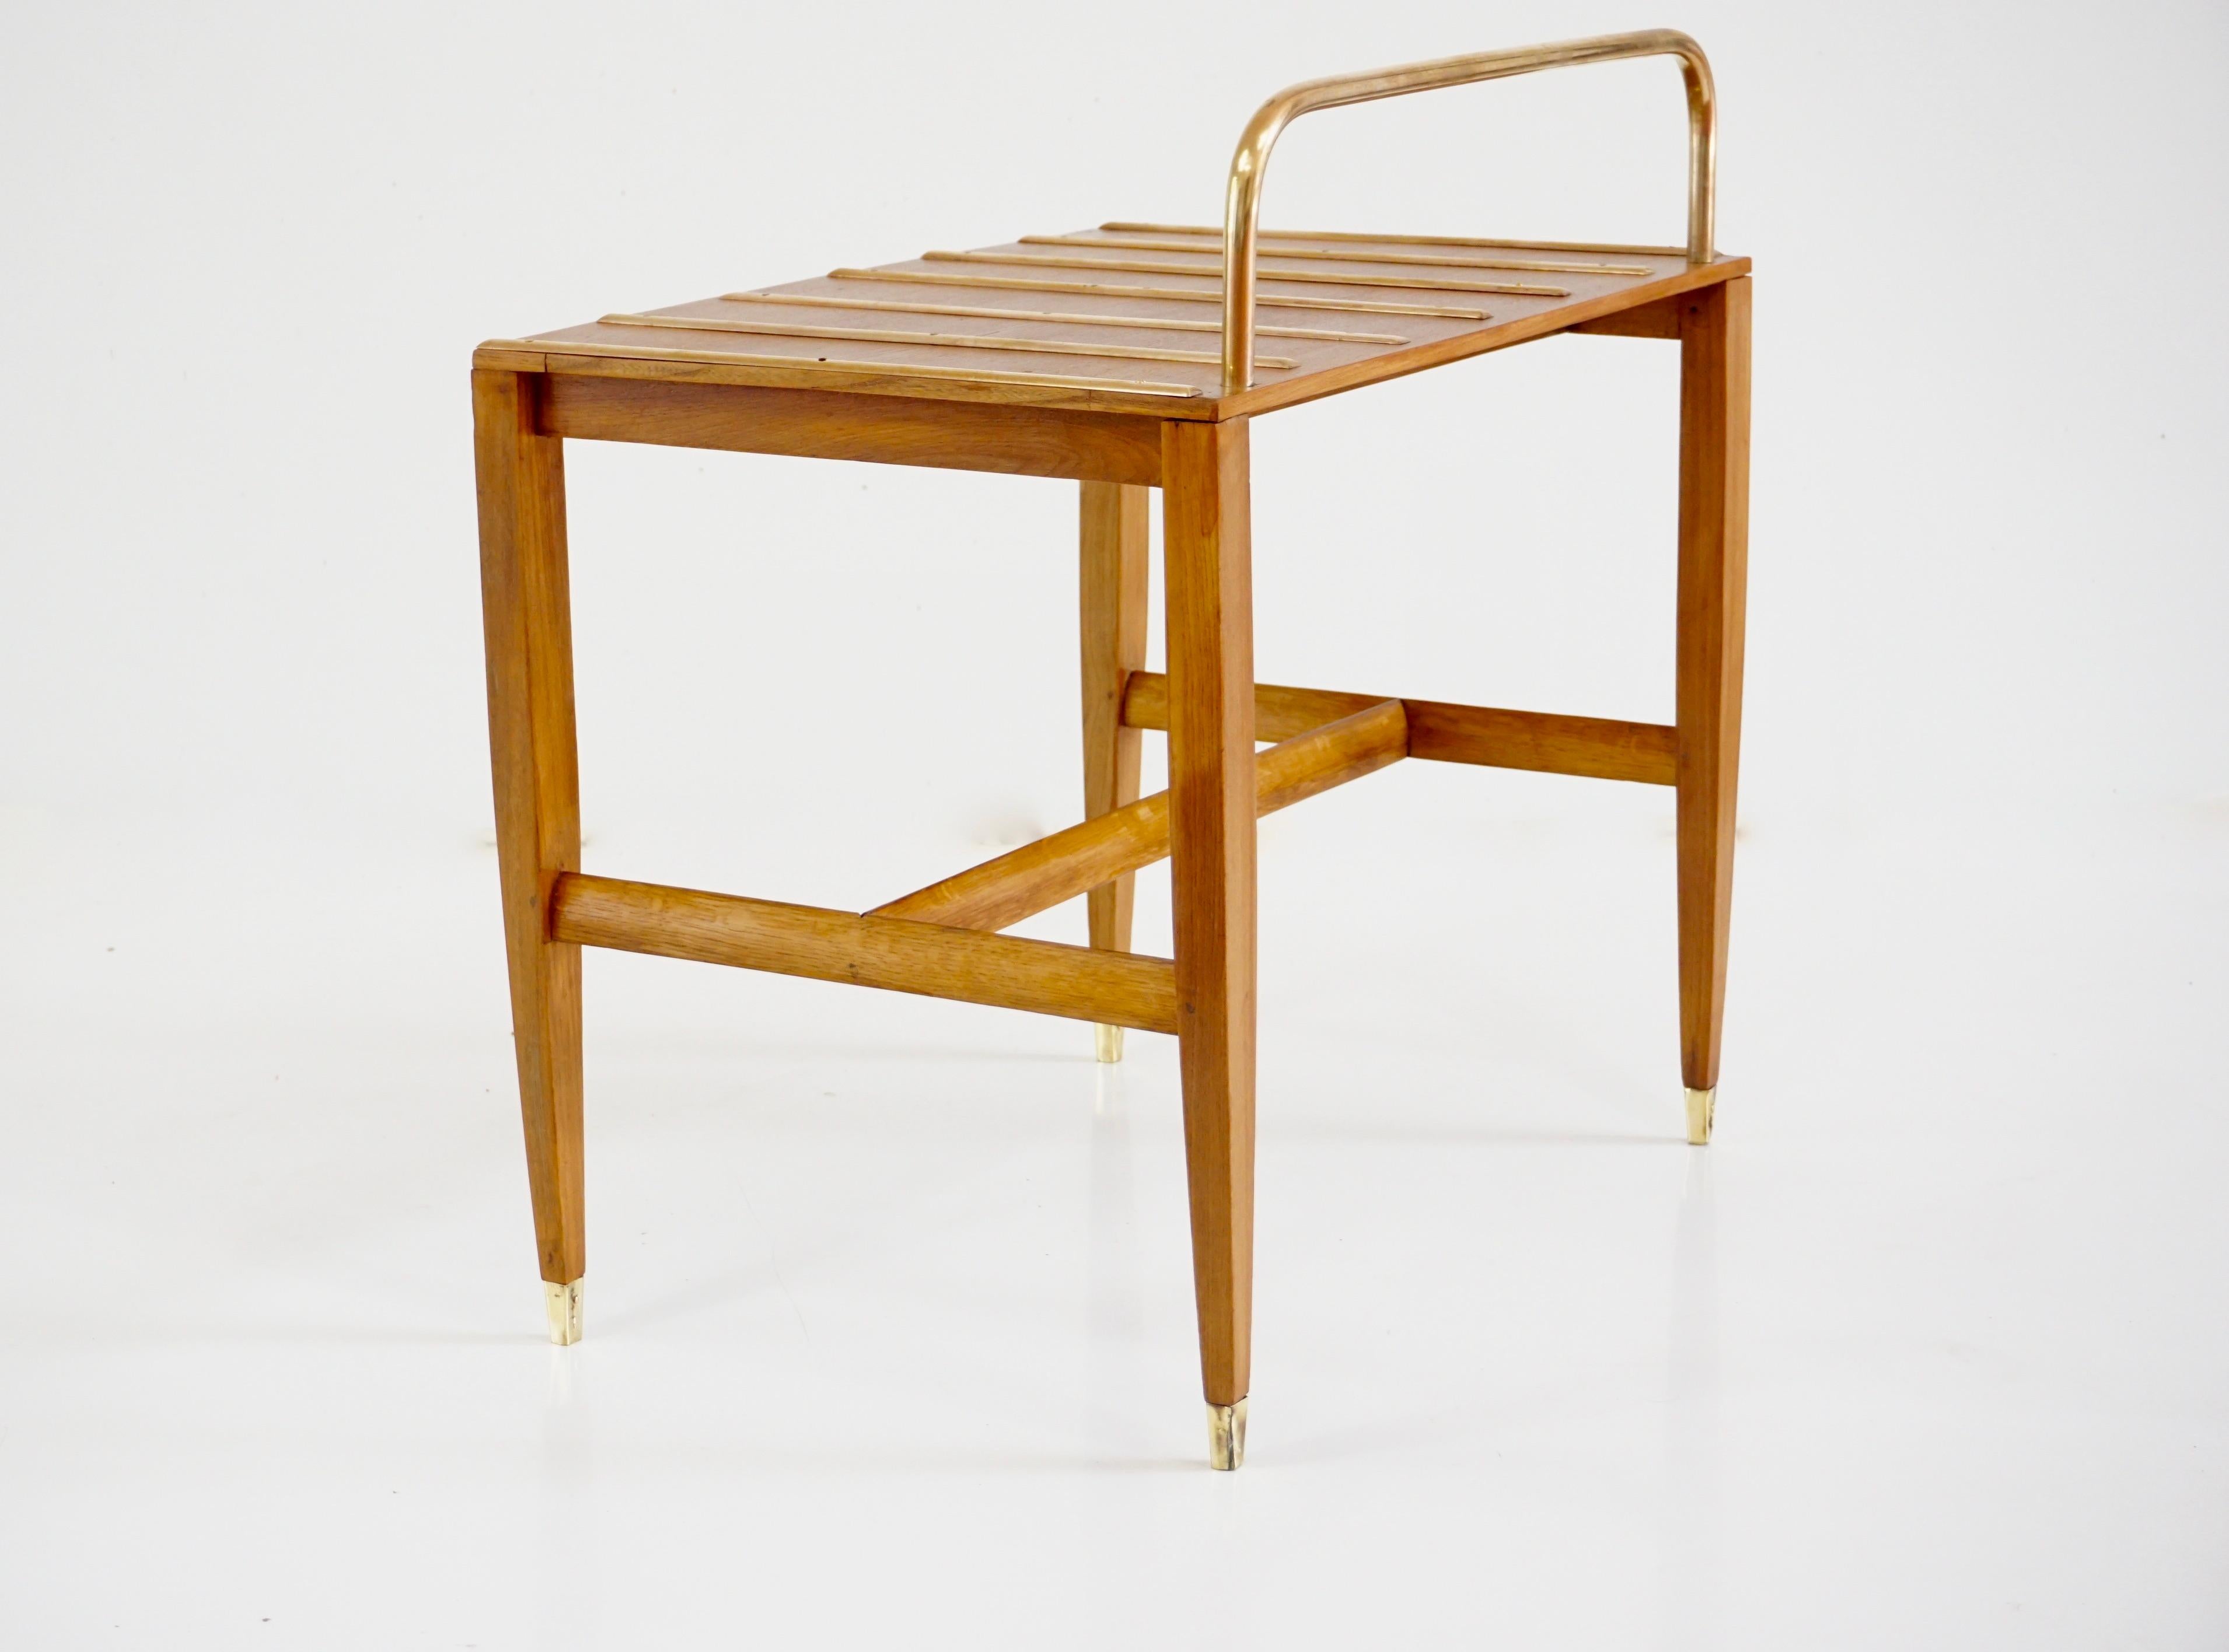 Gio Ponti Walnut Side Table, Luggage Rack for Hotel Royal Naples, 1955 For Sale 4